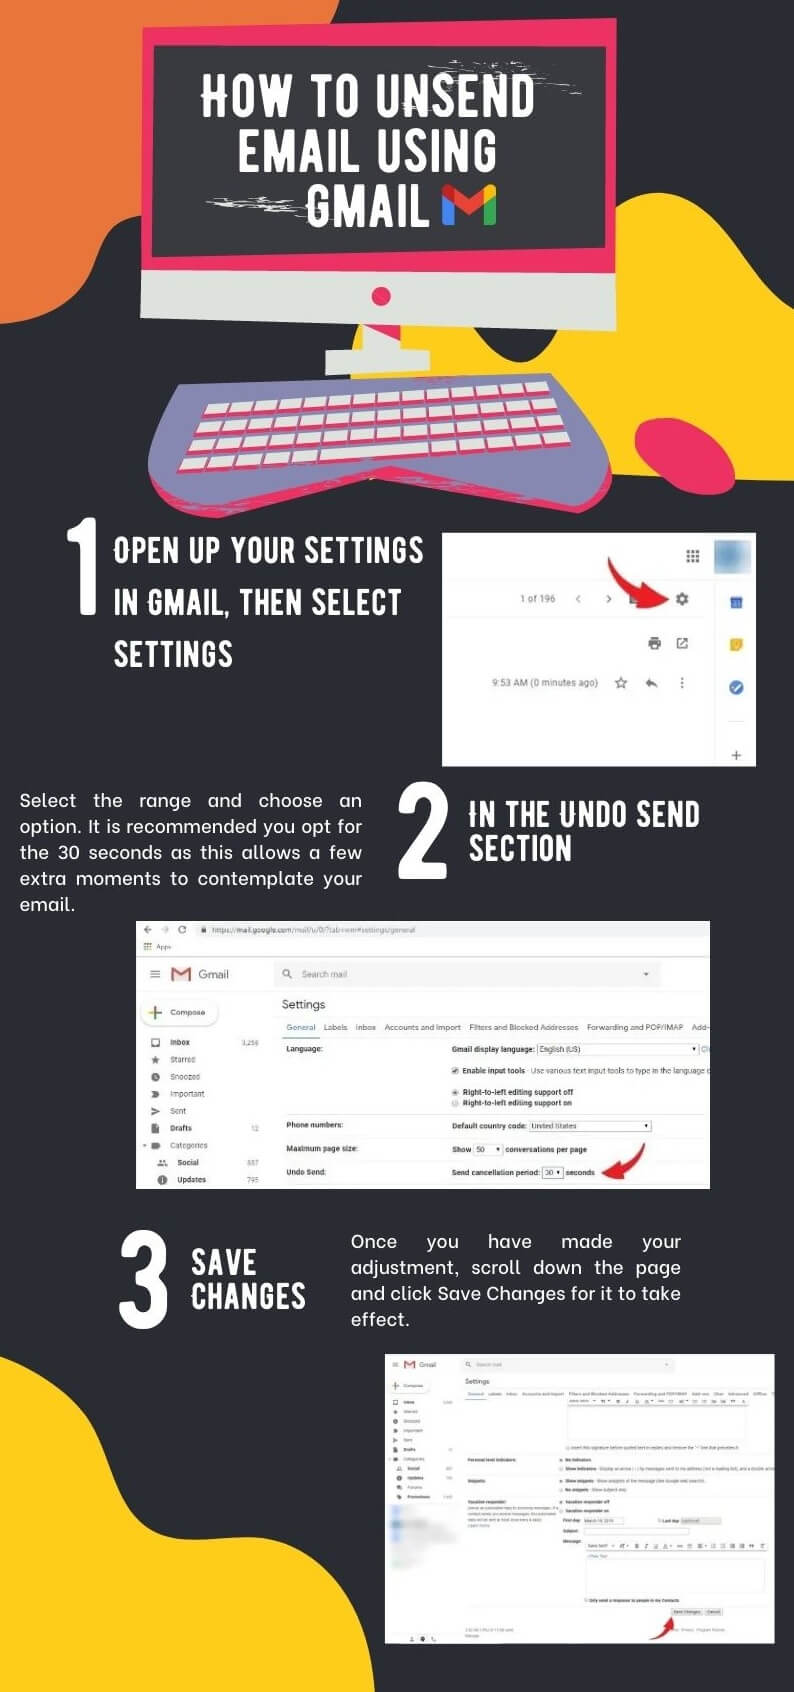 How to unsend email using Gmail